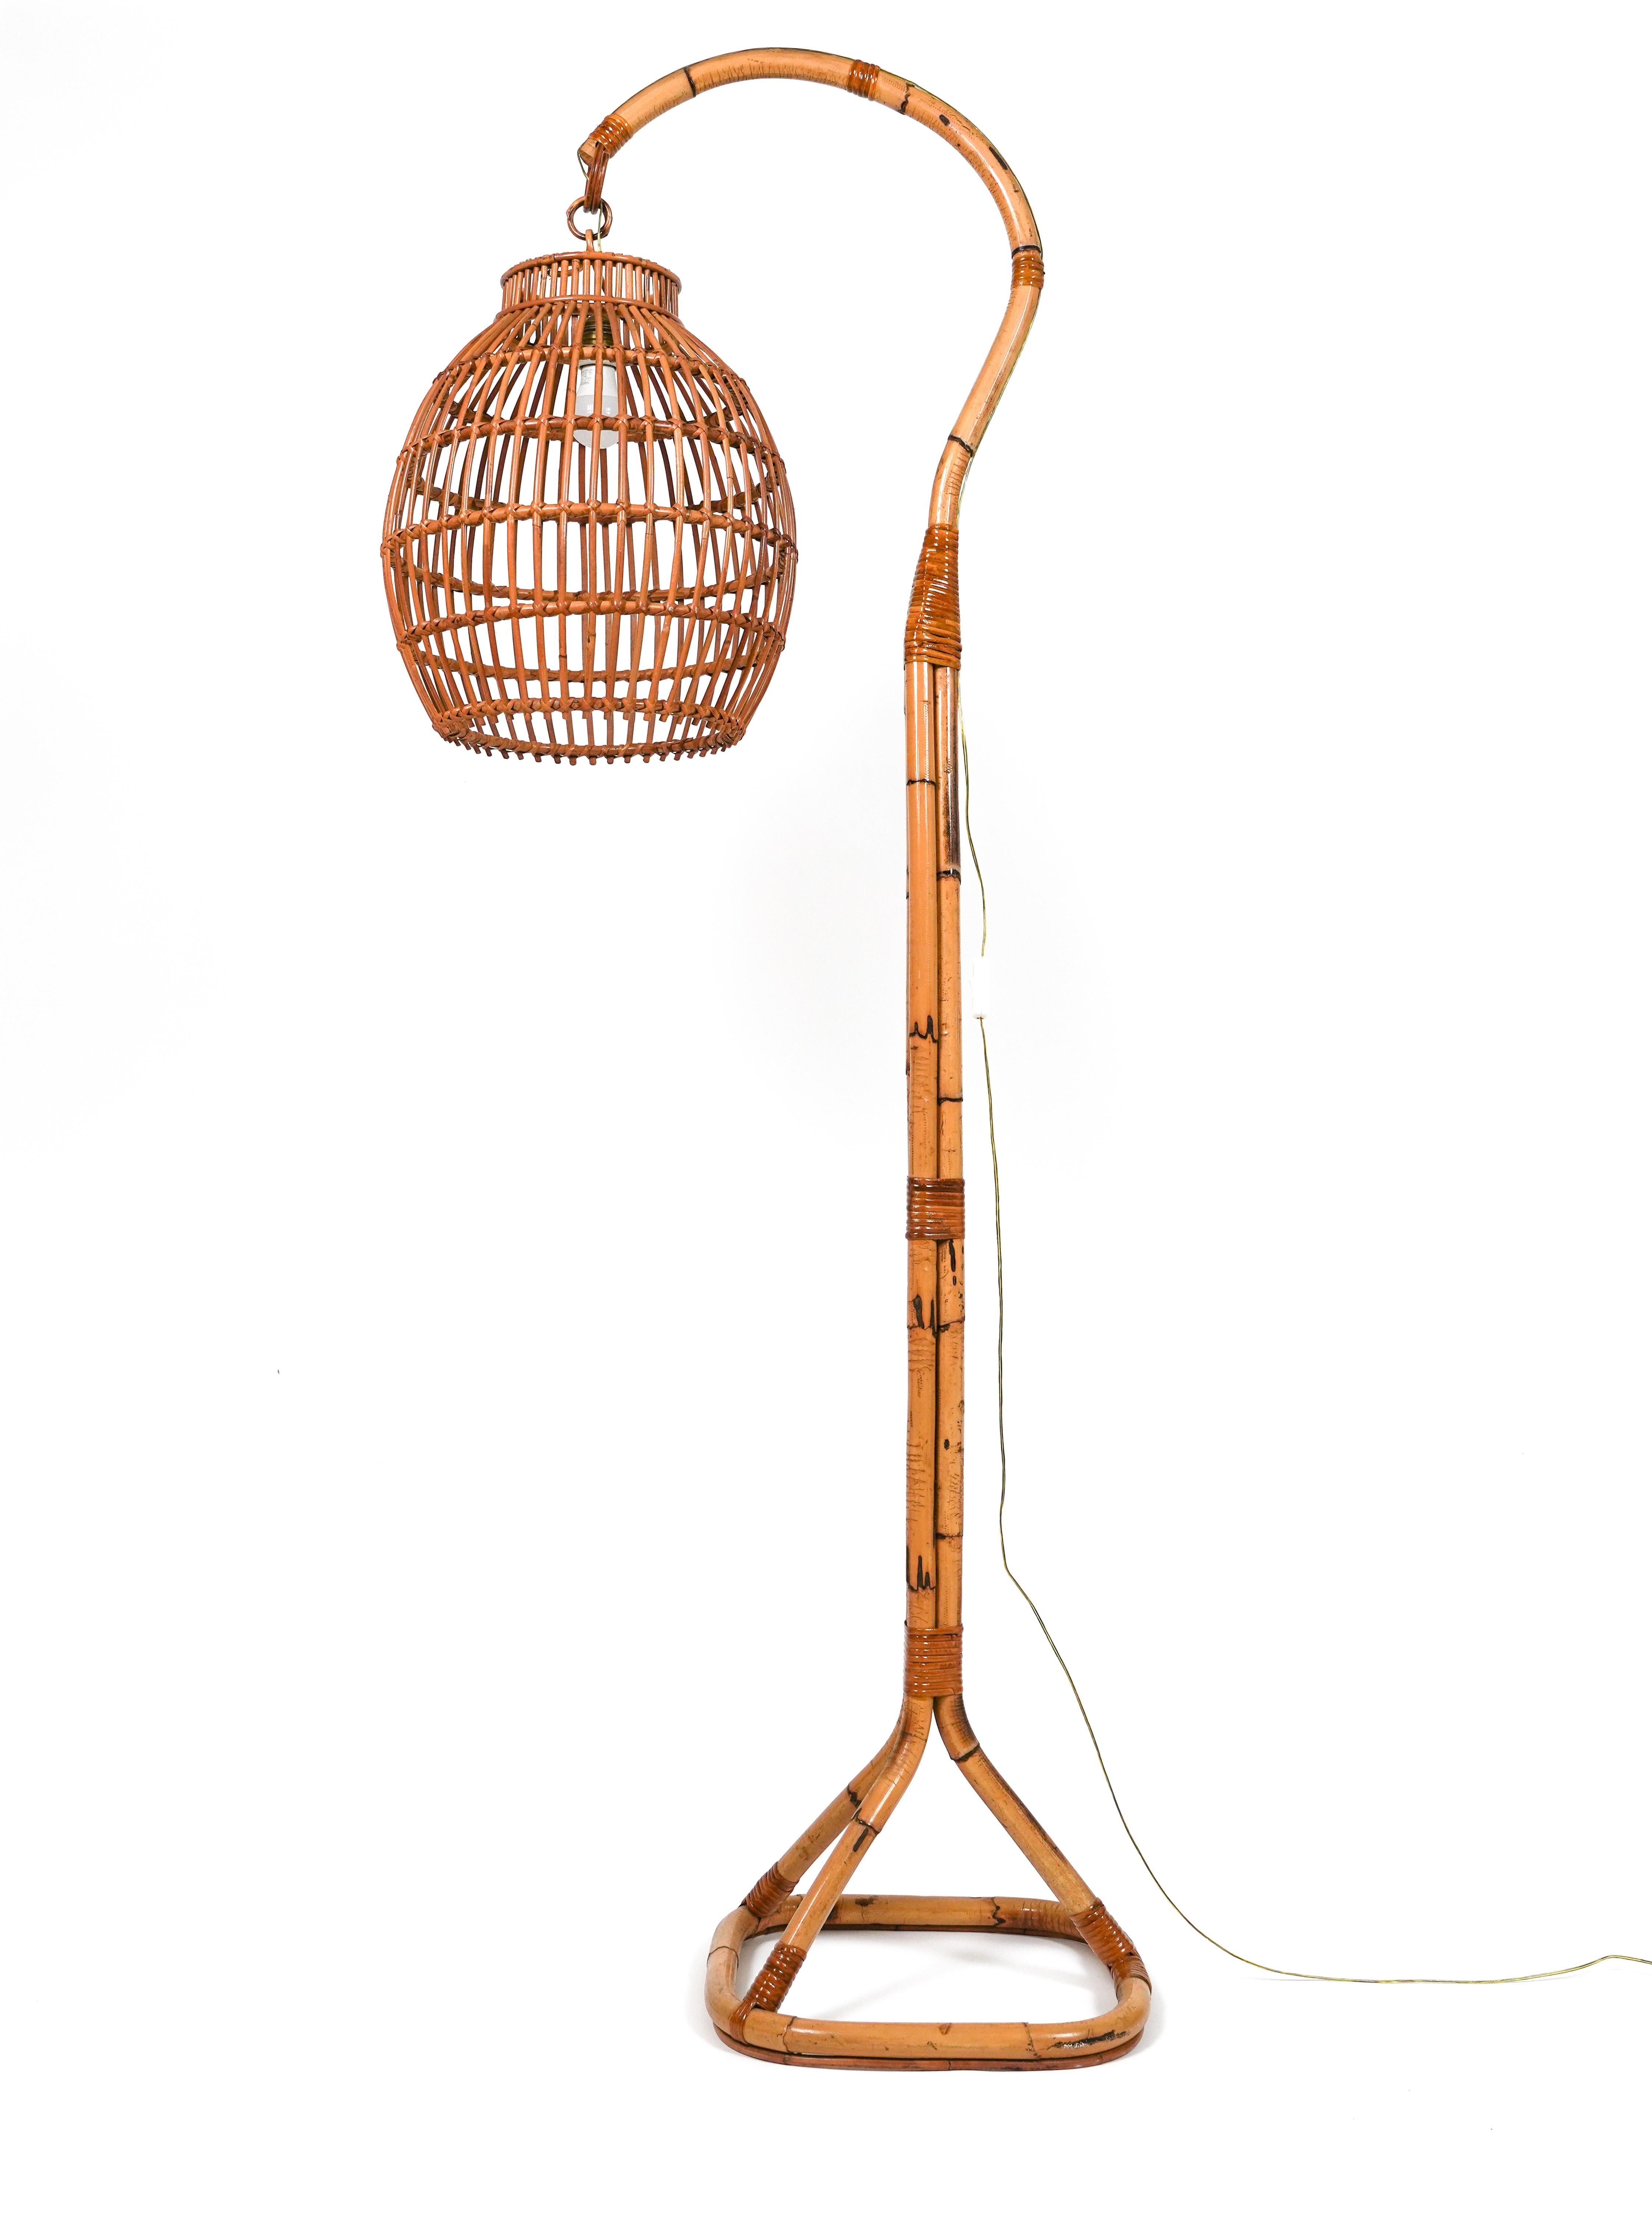 Midcentury Rattan and Bamboo Floor Lamp Louis Sognot Style, Italy 1960s For Sale 3